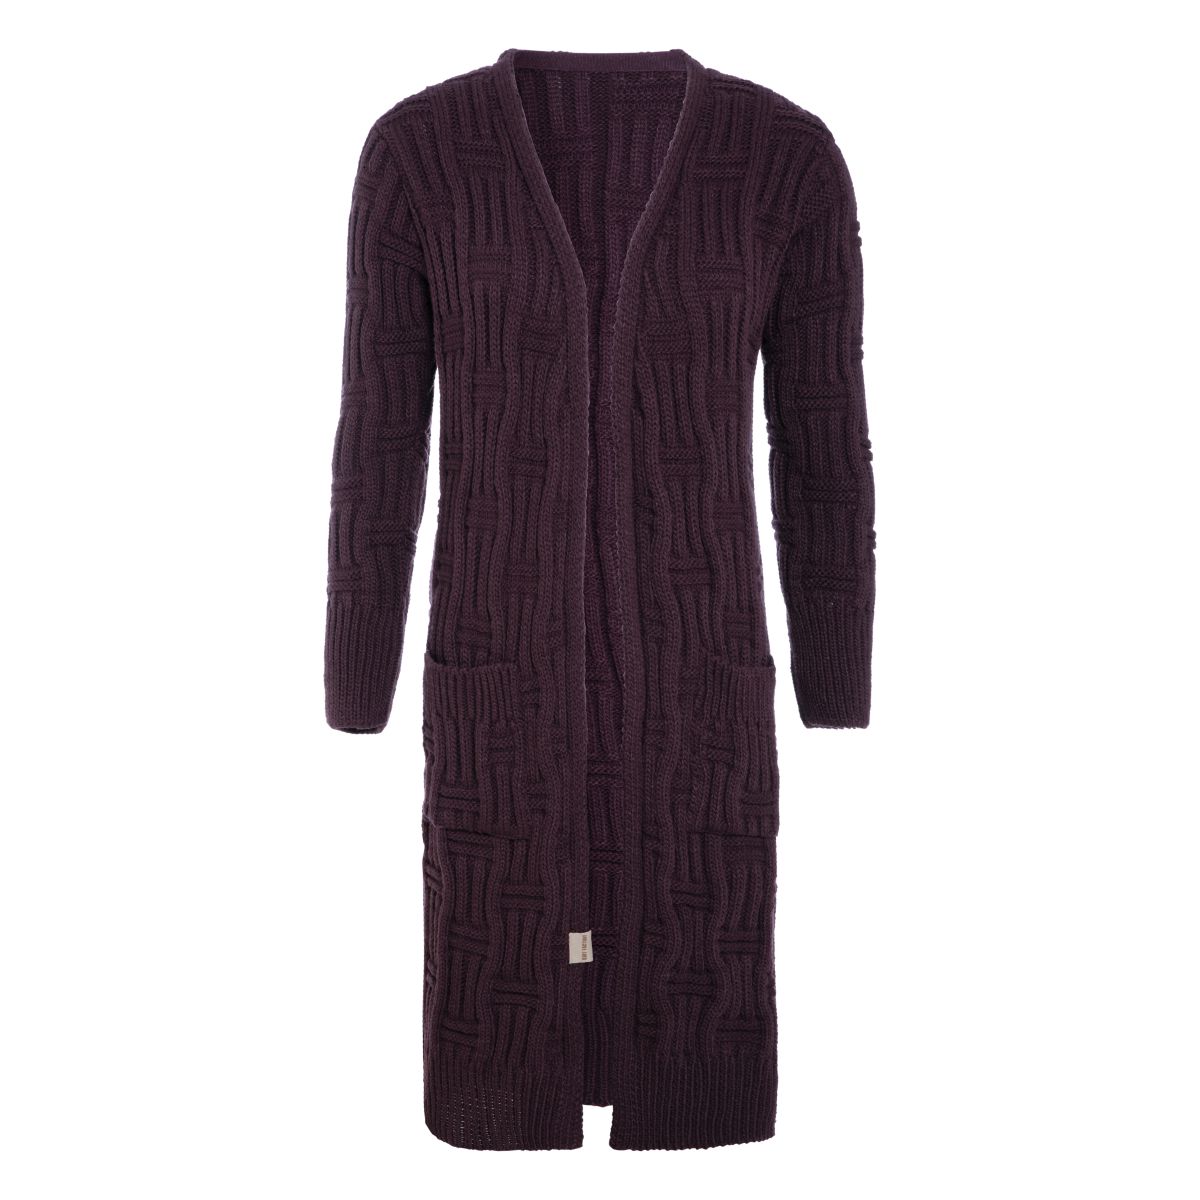 bobby long knitted cardigan aubergine 4042 with side pockets